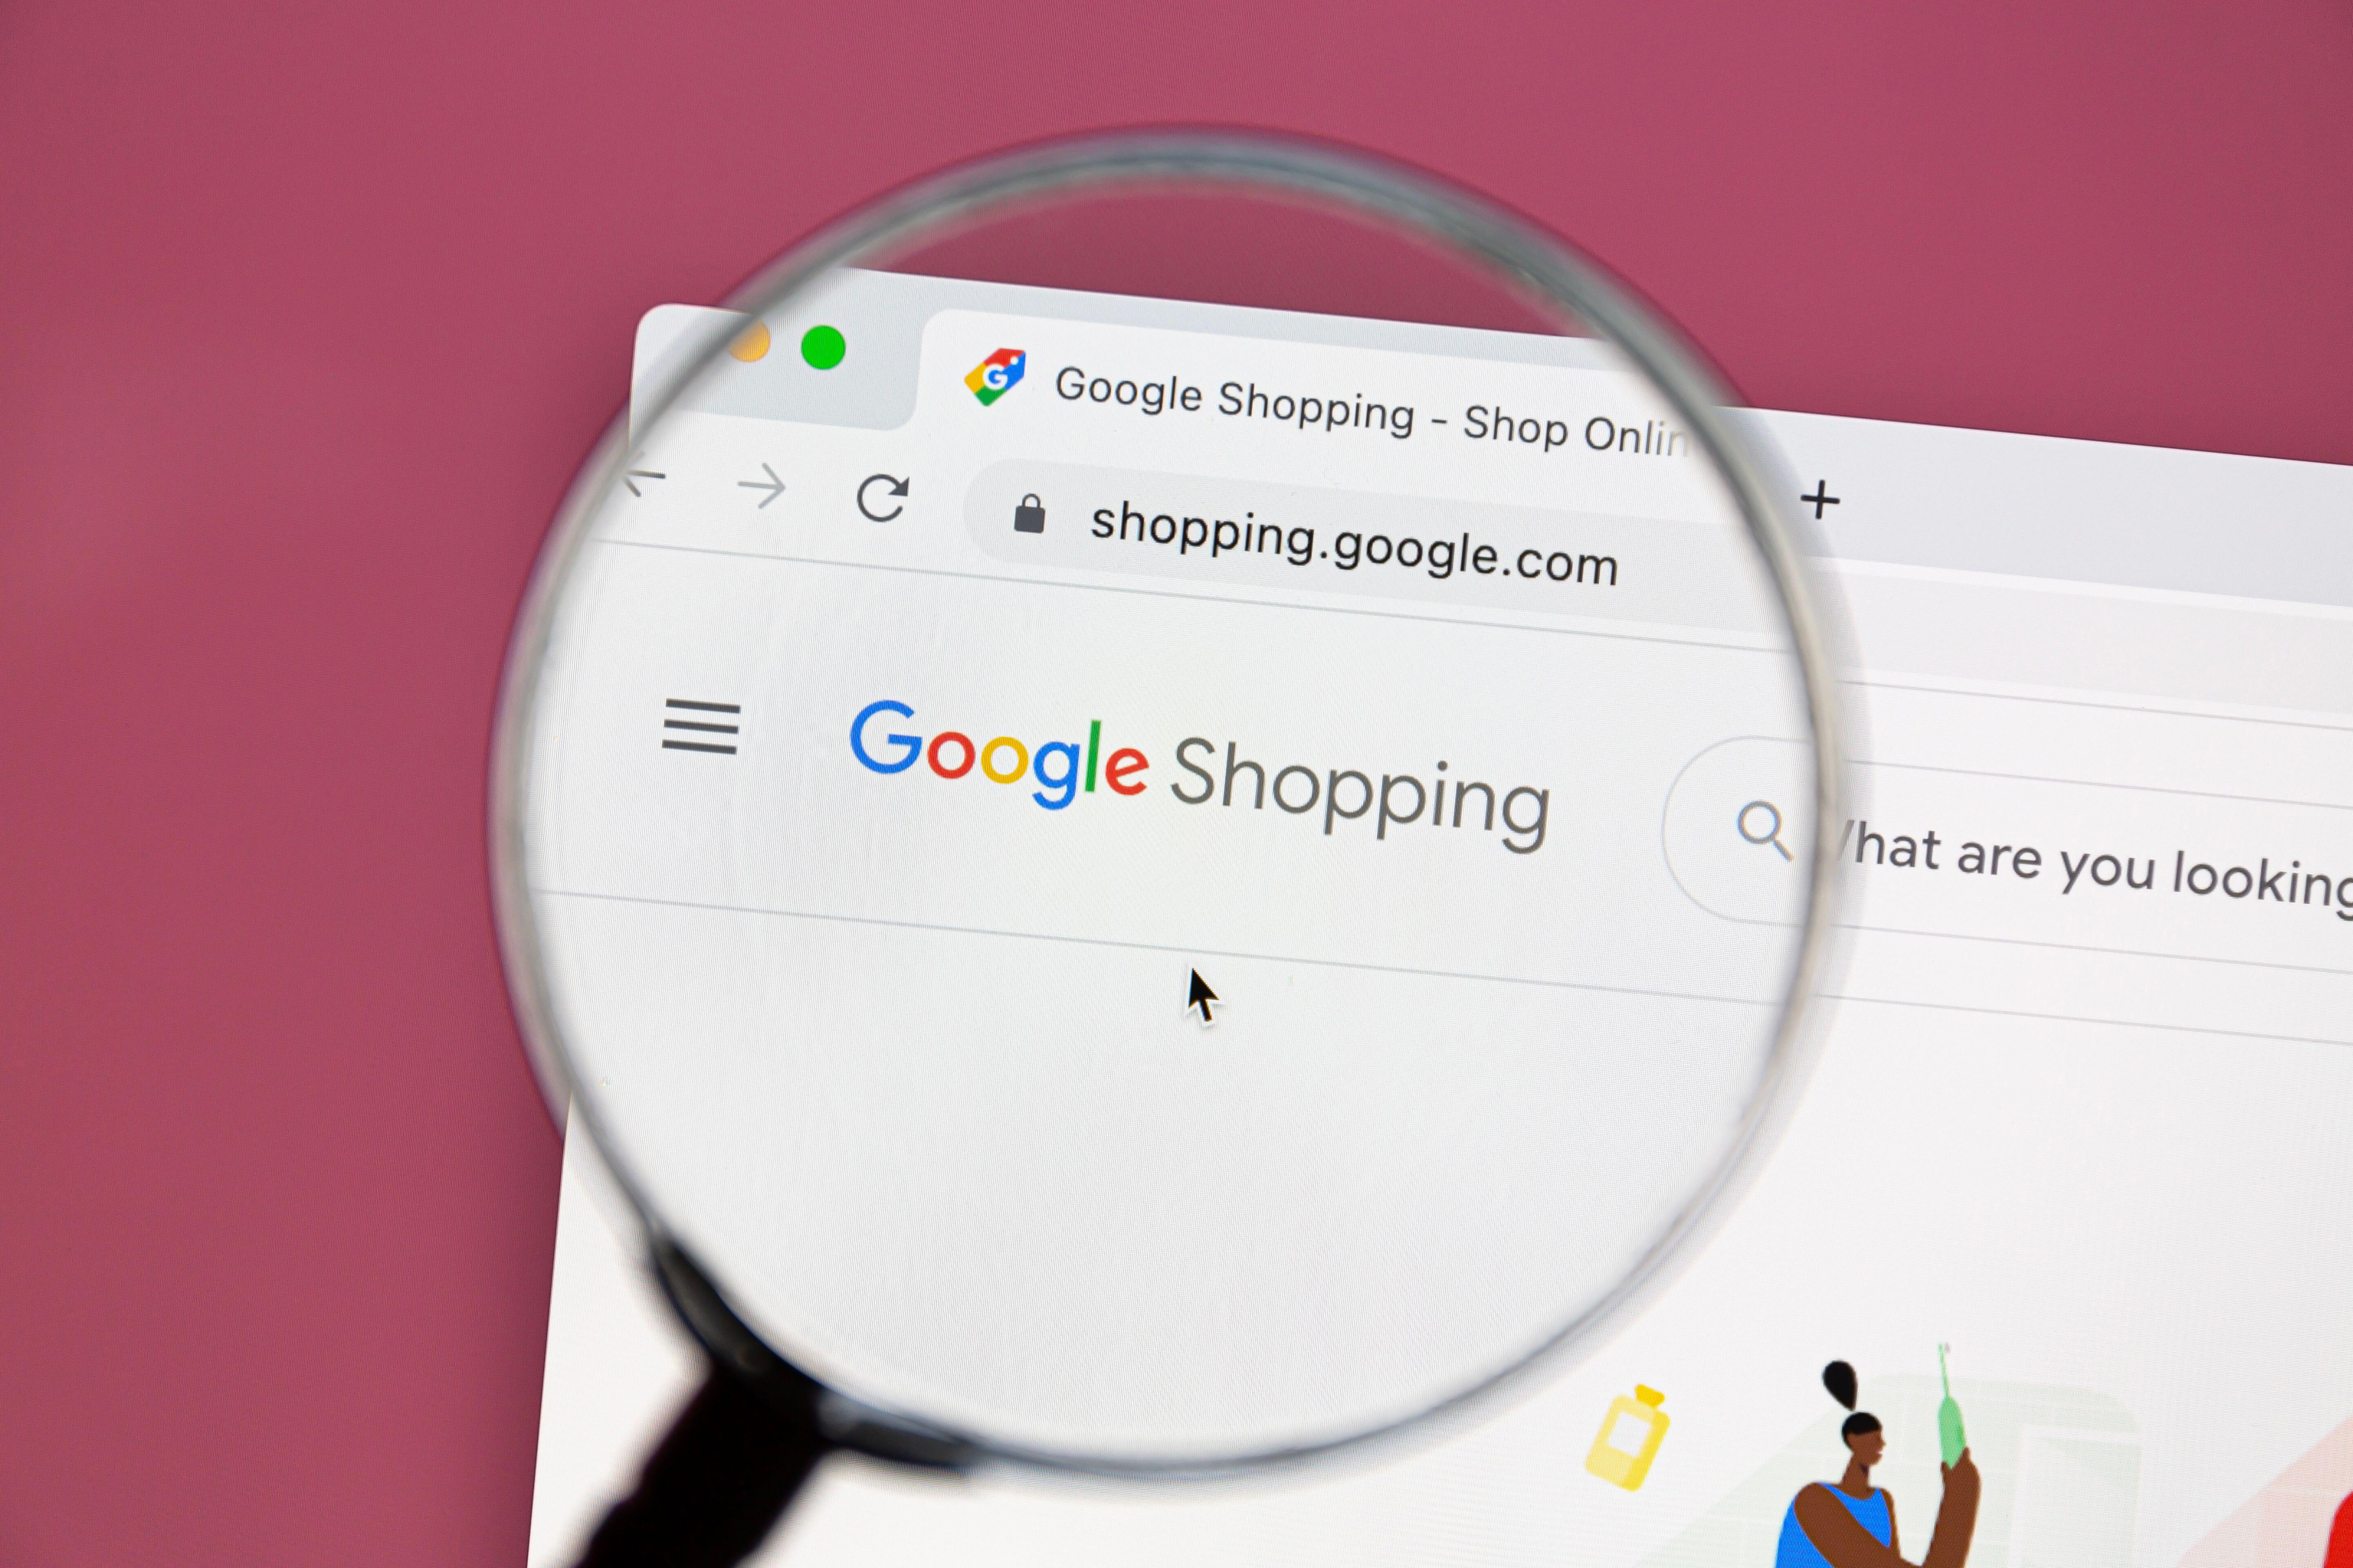 Google shopping and comparing prices